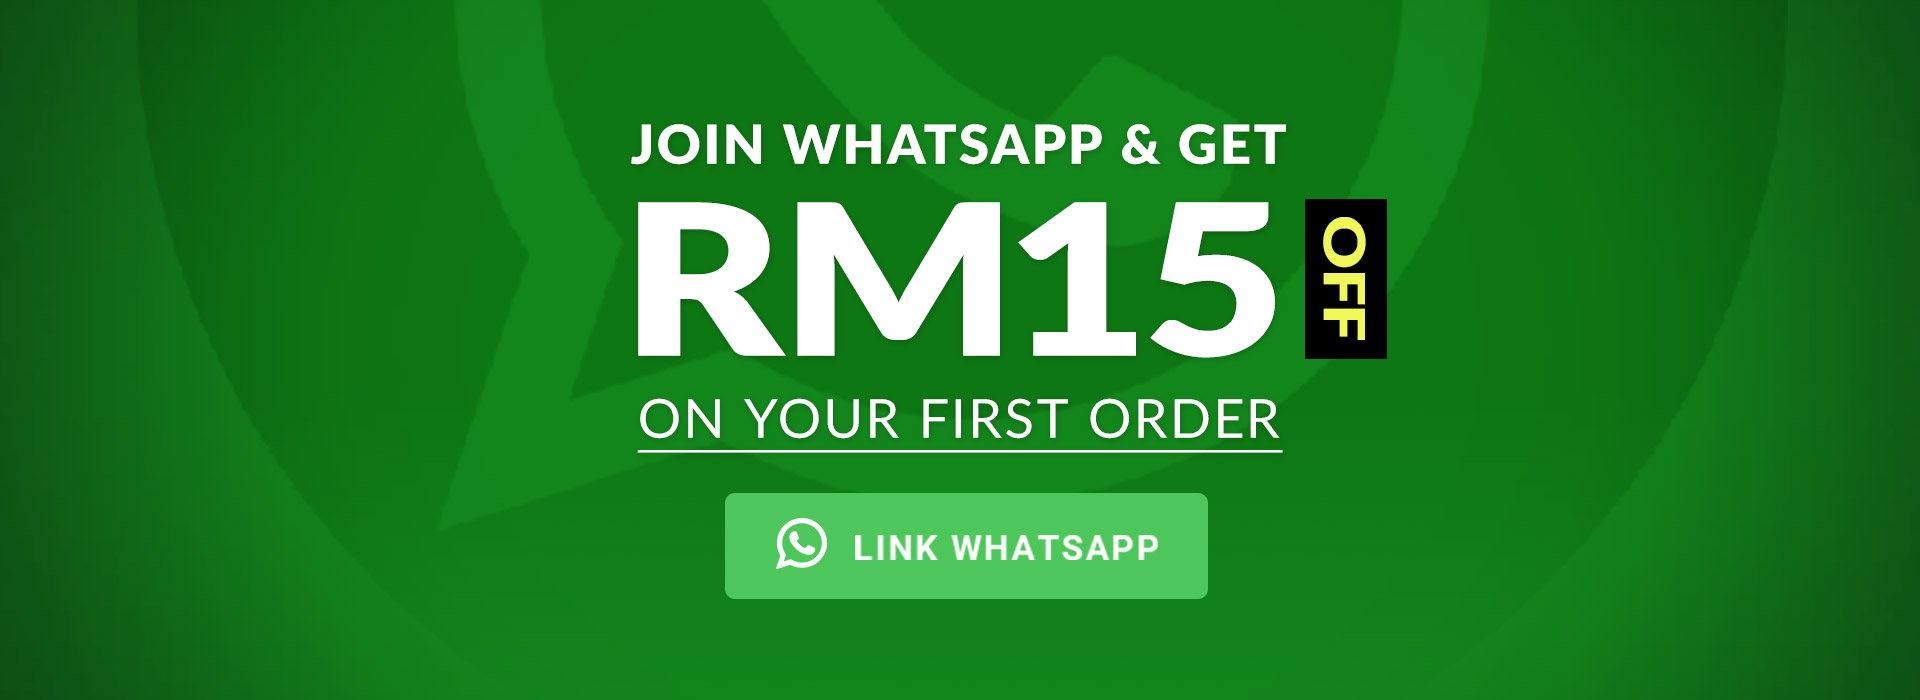 Join WhatsApp Get RM15 OFF Promo Code